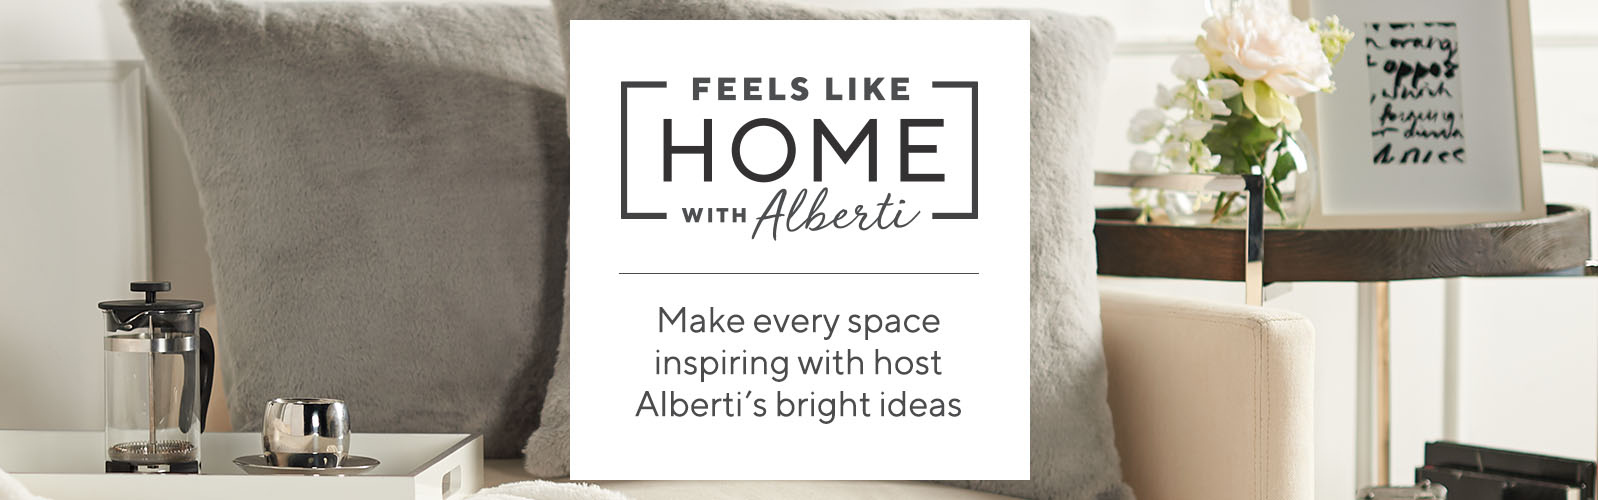 Feels Like Home with Alberti.  Make every space inspiring with host Alberti's bright ideas